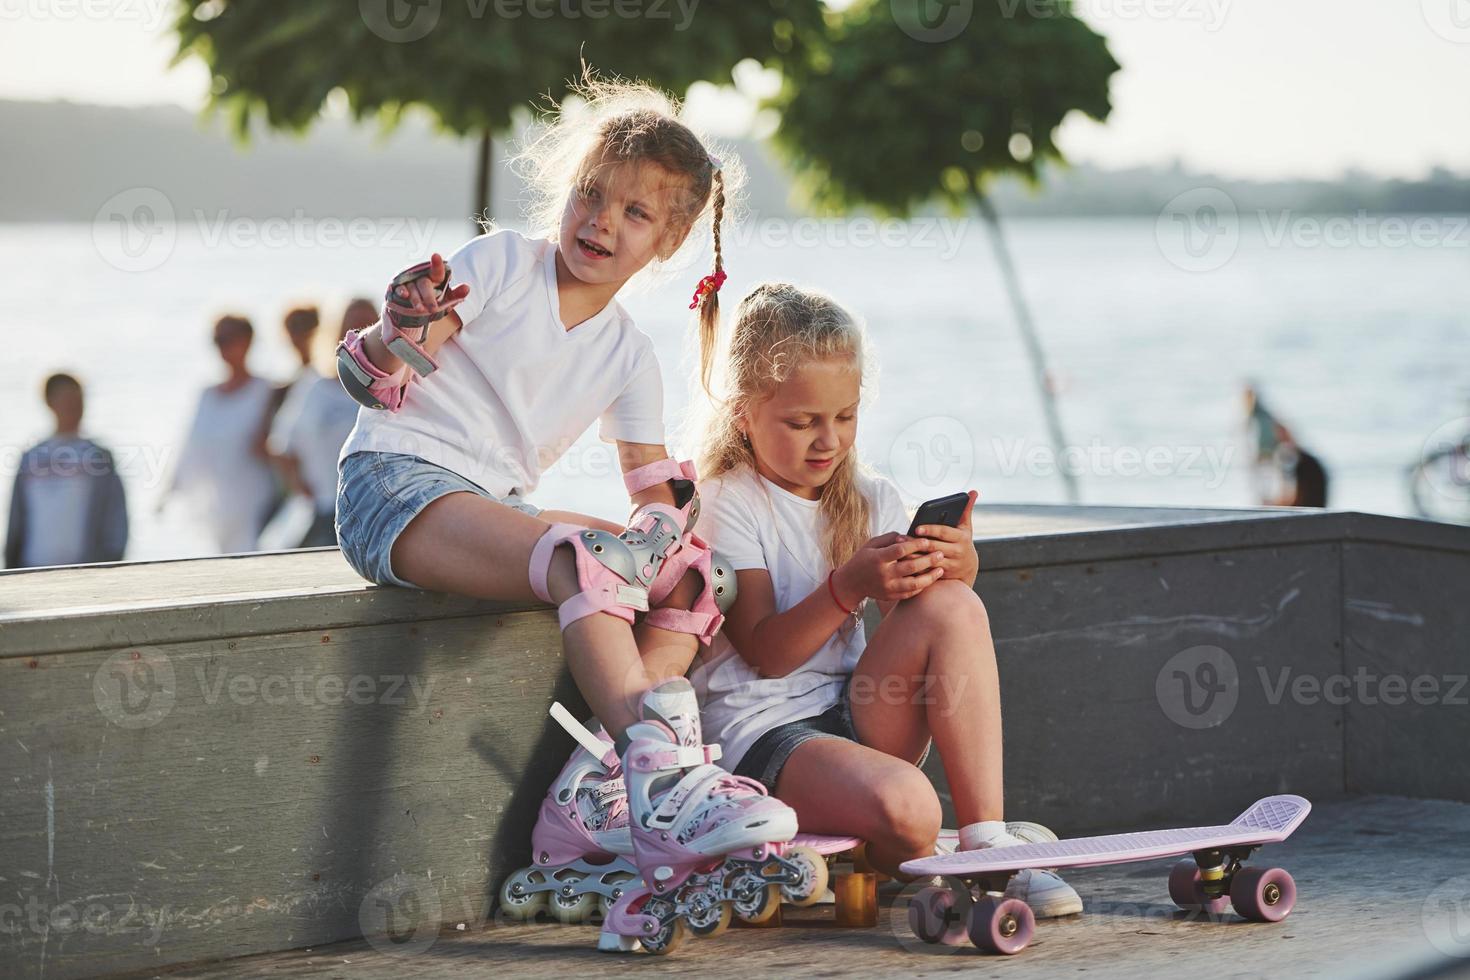 Talking with each other. On the ramp for extreme sports. Two little girls with roller skates outdoors have fun photo